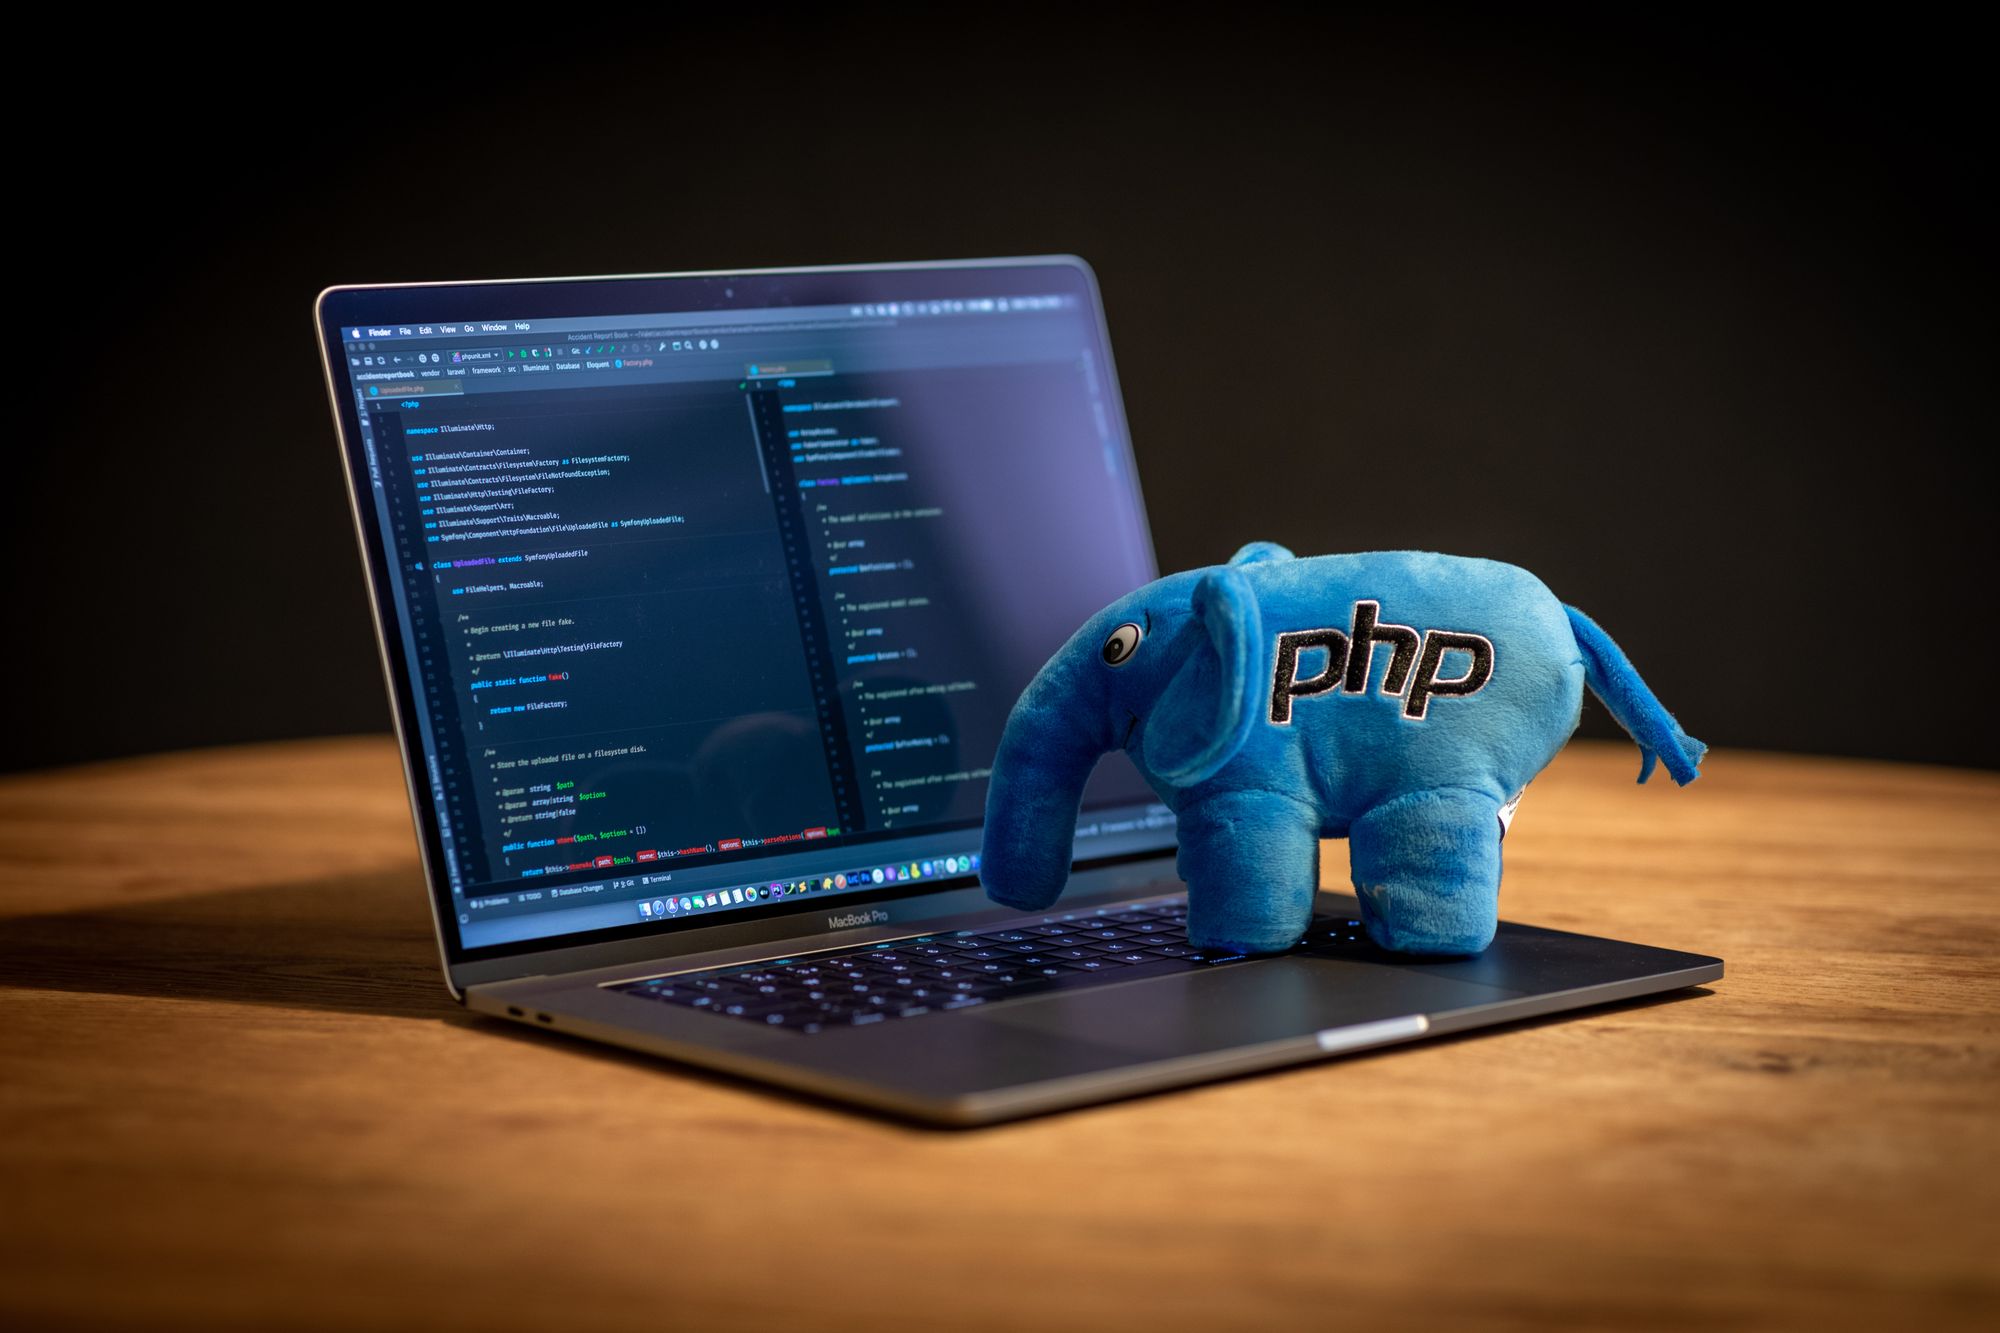 Plushy elephant with PHP written on it, standing on top of a MacBook keyboard.